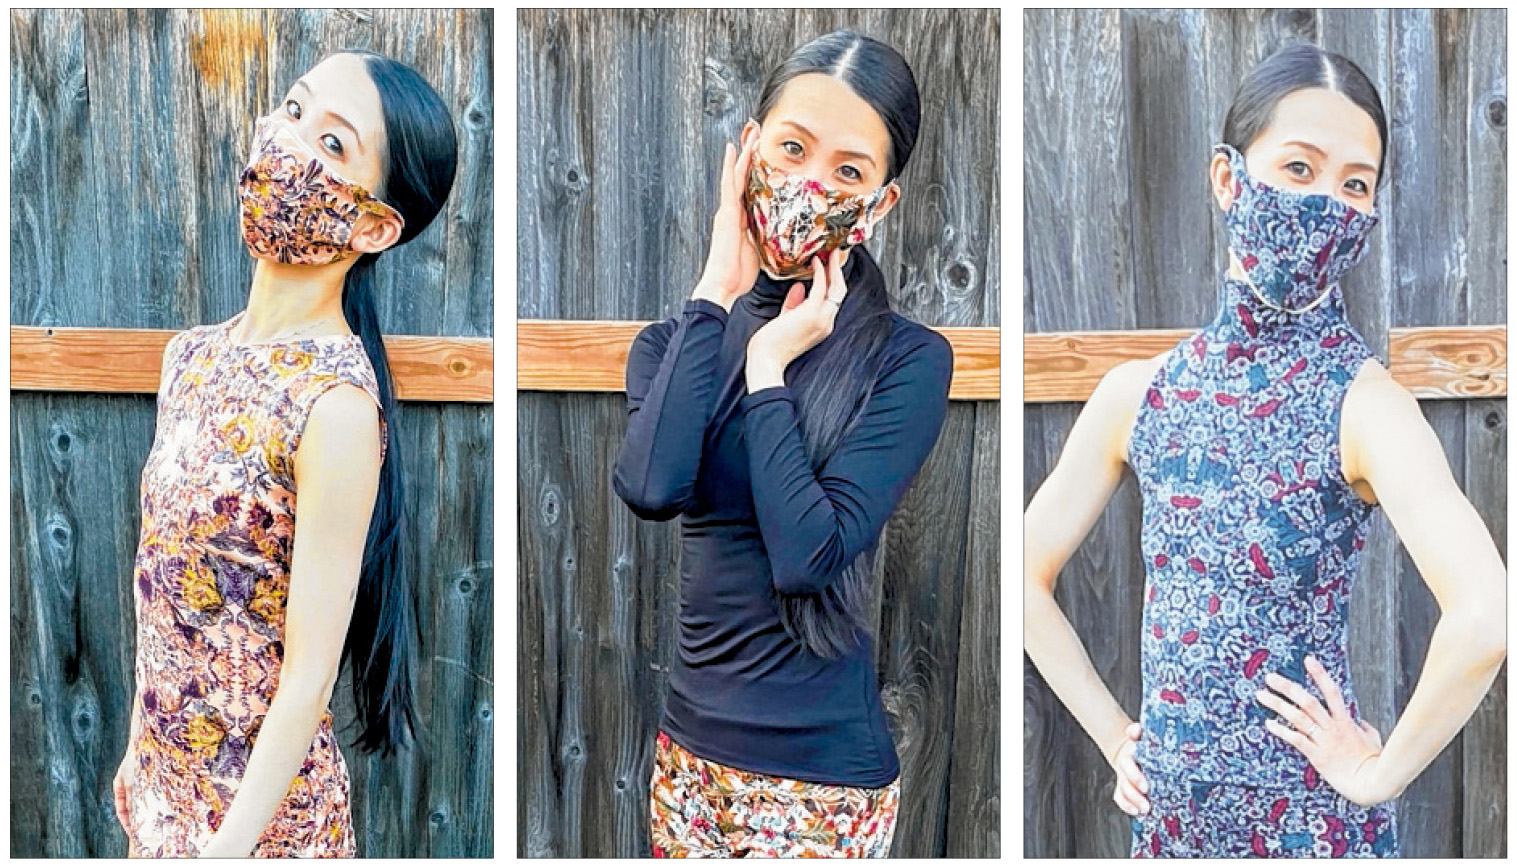 Yuki Tokuda, a dancer who lives in Minneapolis, sews her own clothes and, realizing she had extra fabric, decided to make matching masks.